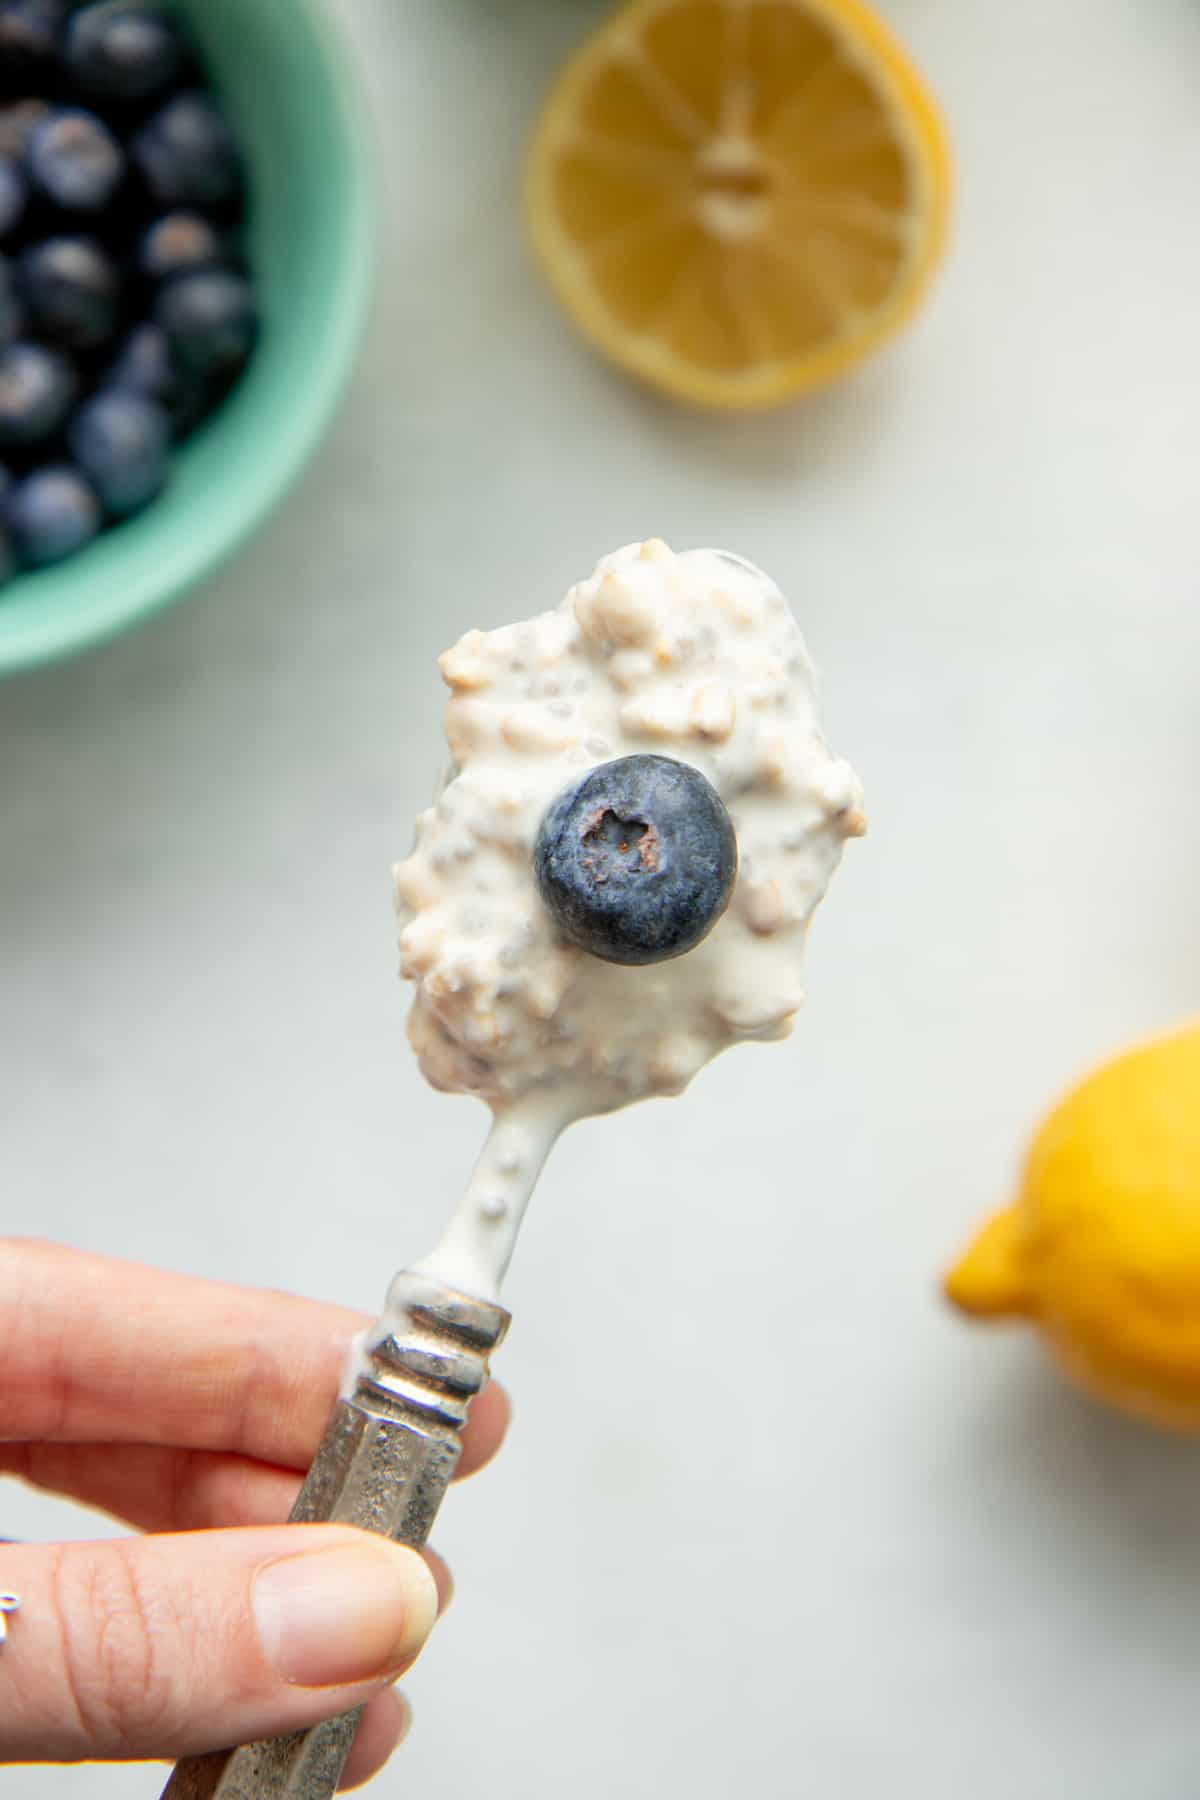 A spoon holding a bite of overnight oats is topped with a whole blueberry.